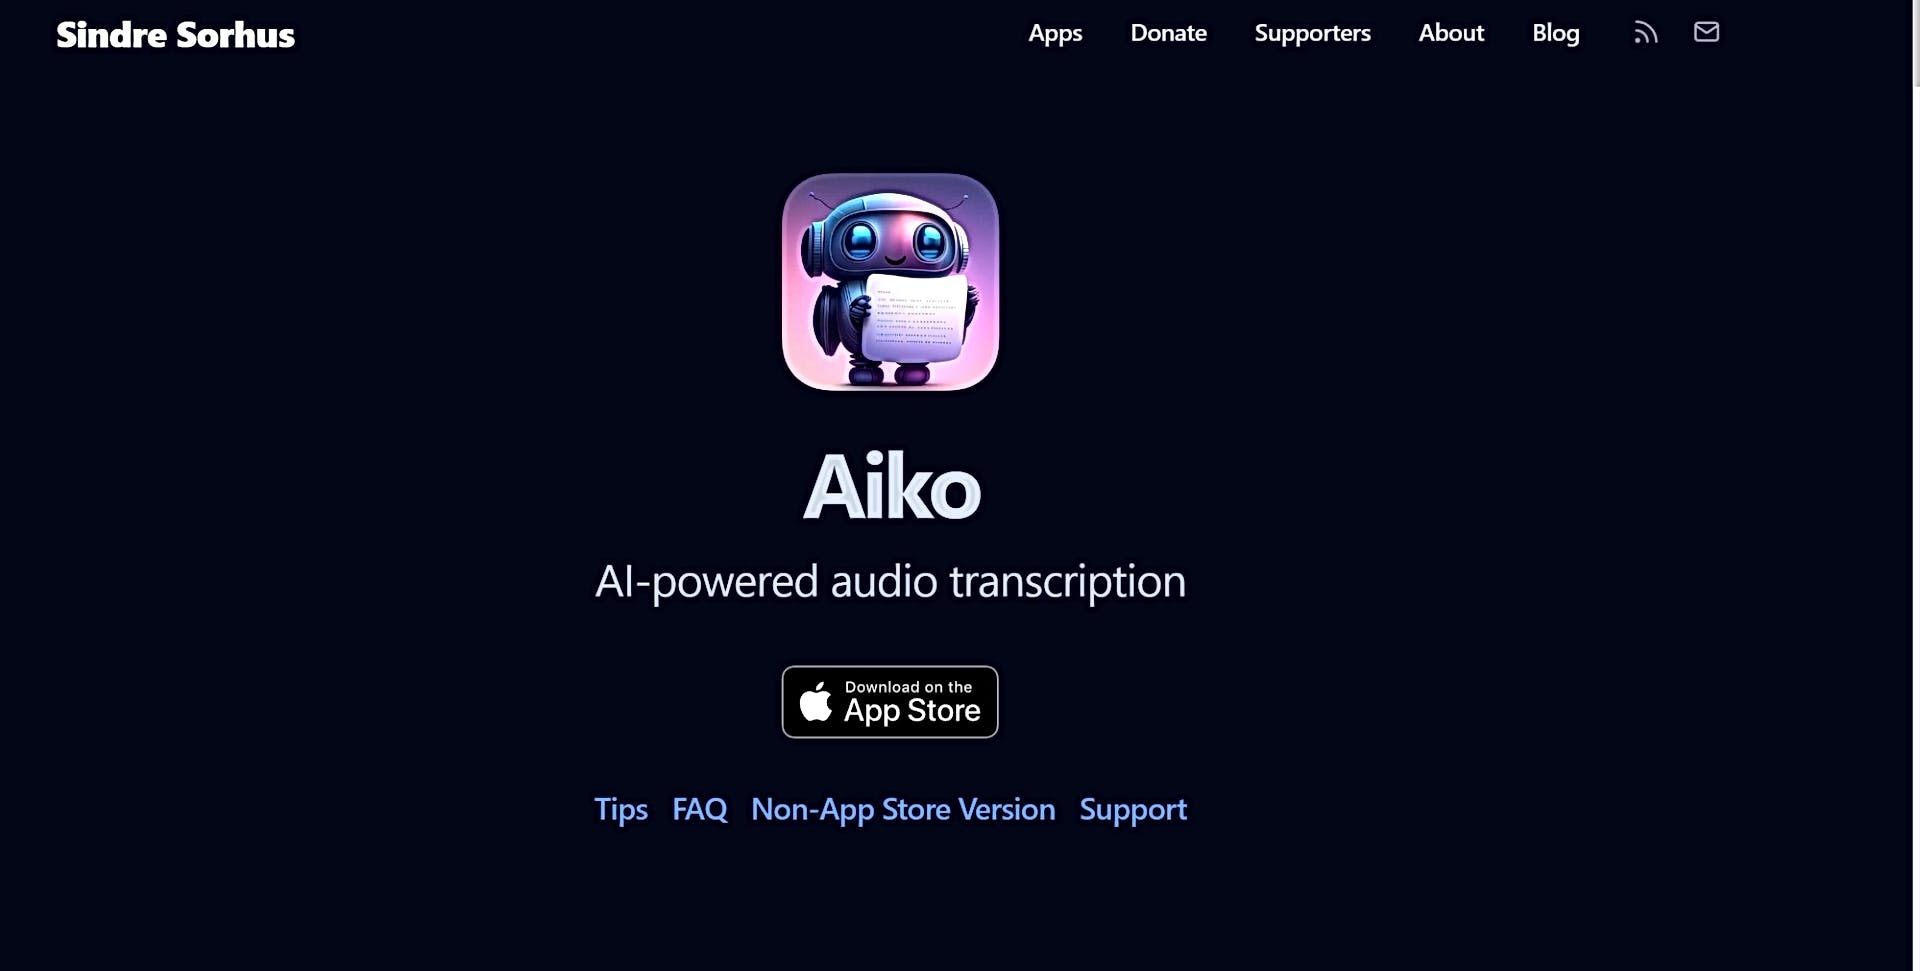 Aiko featured